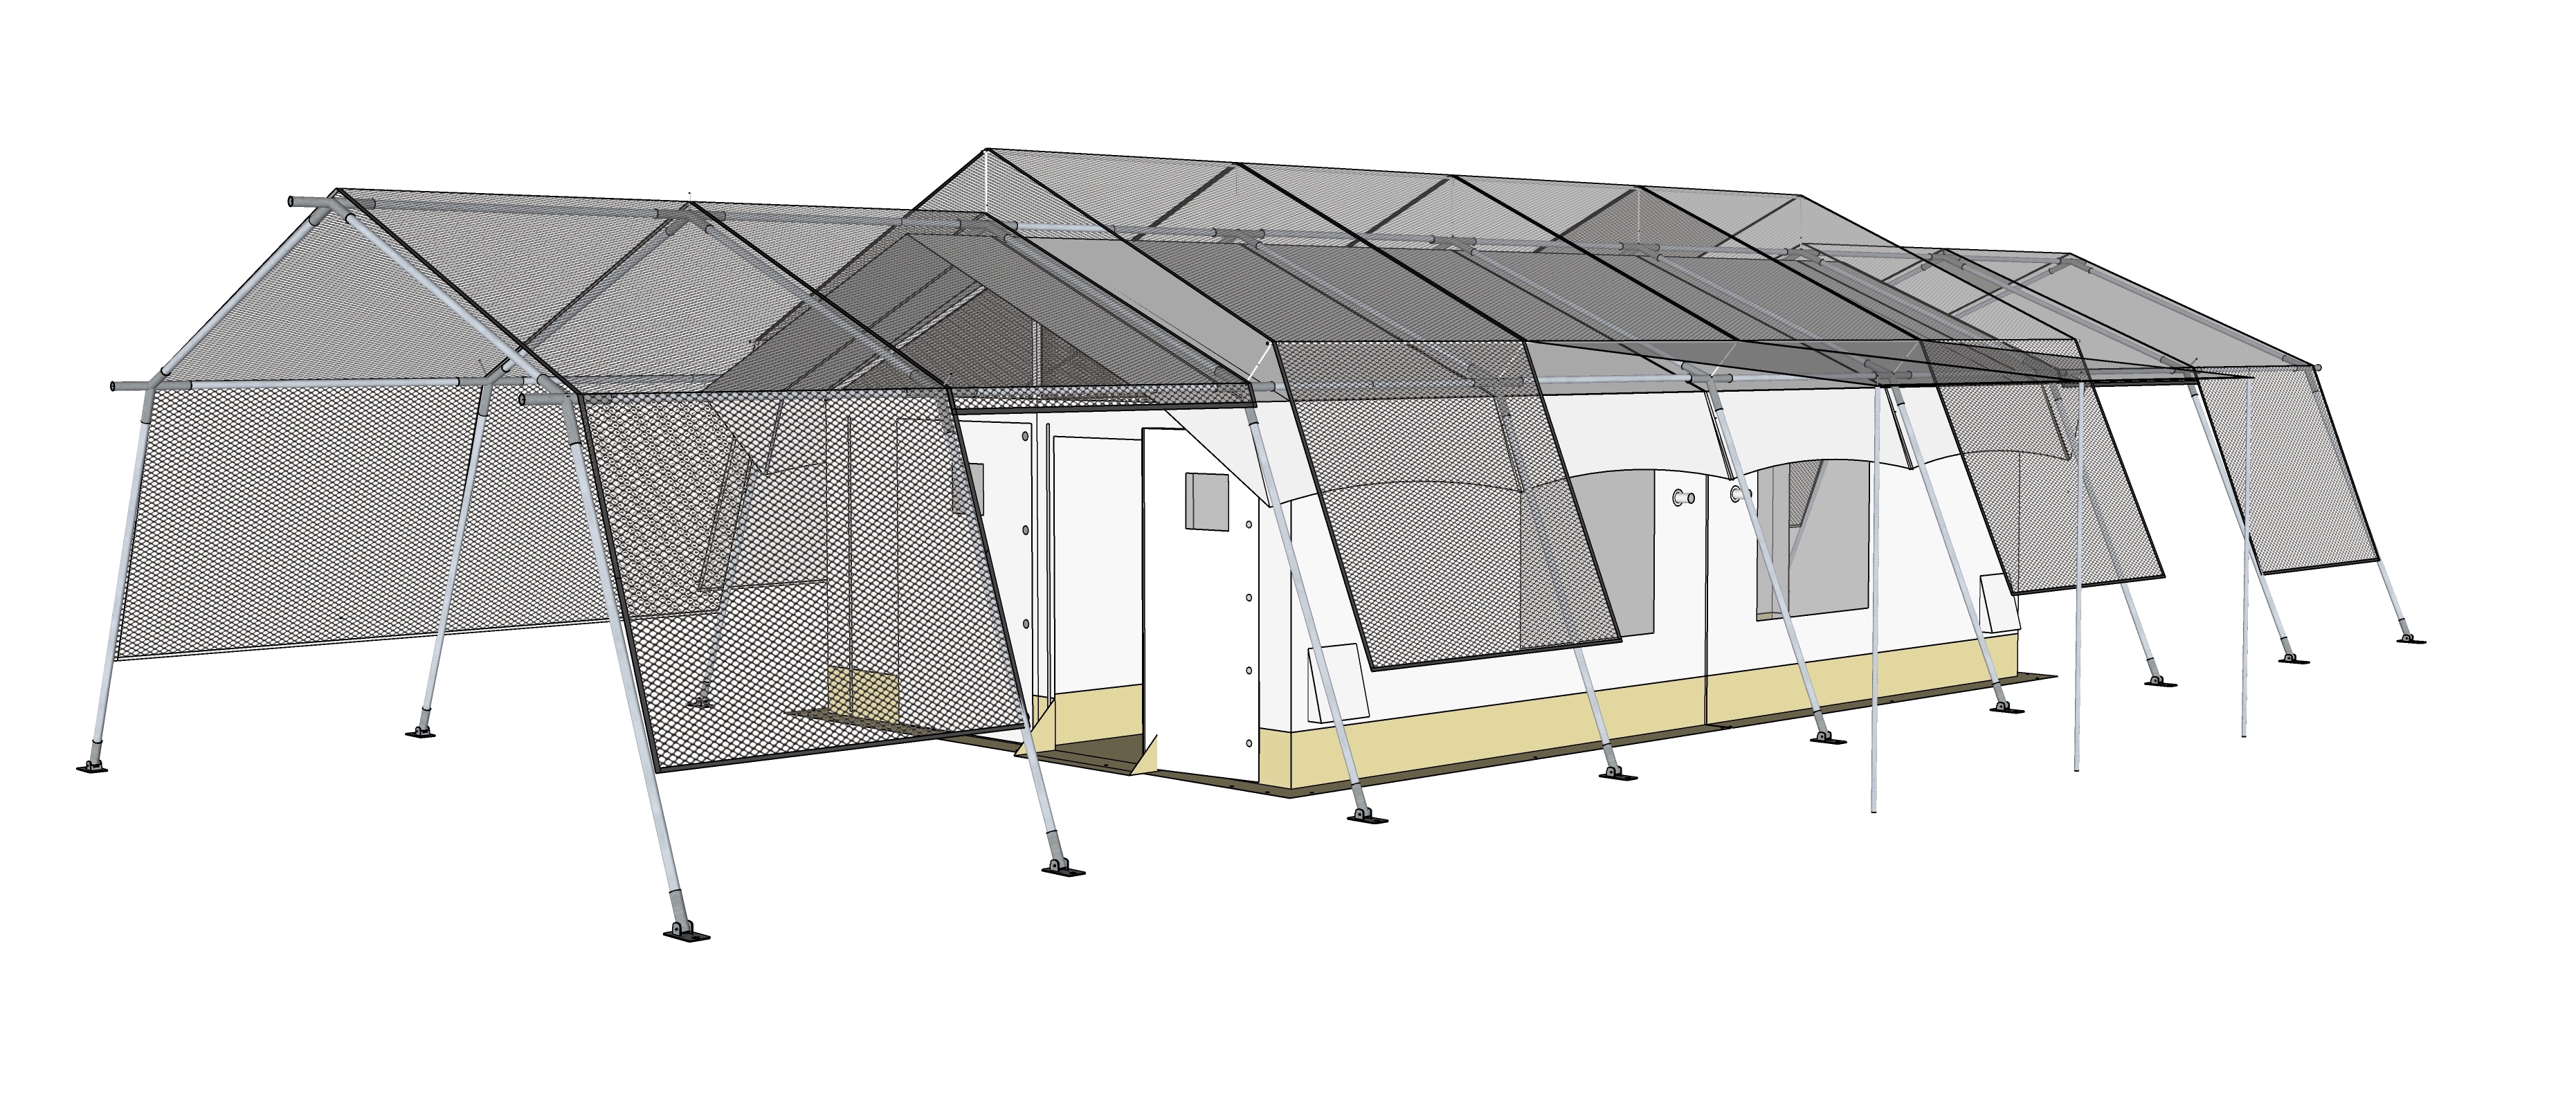 Main tent with multiple patients cabin